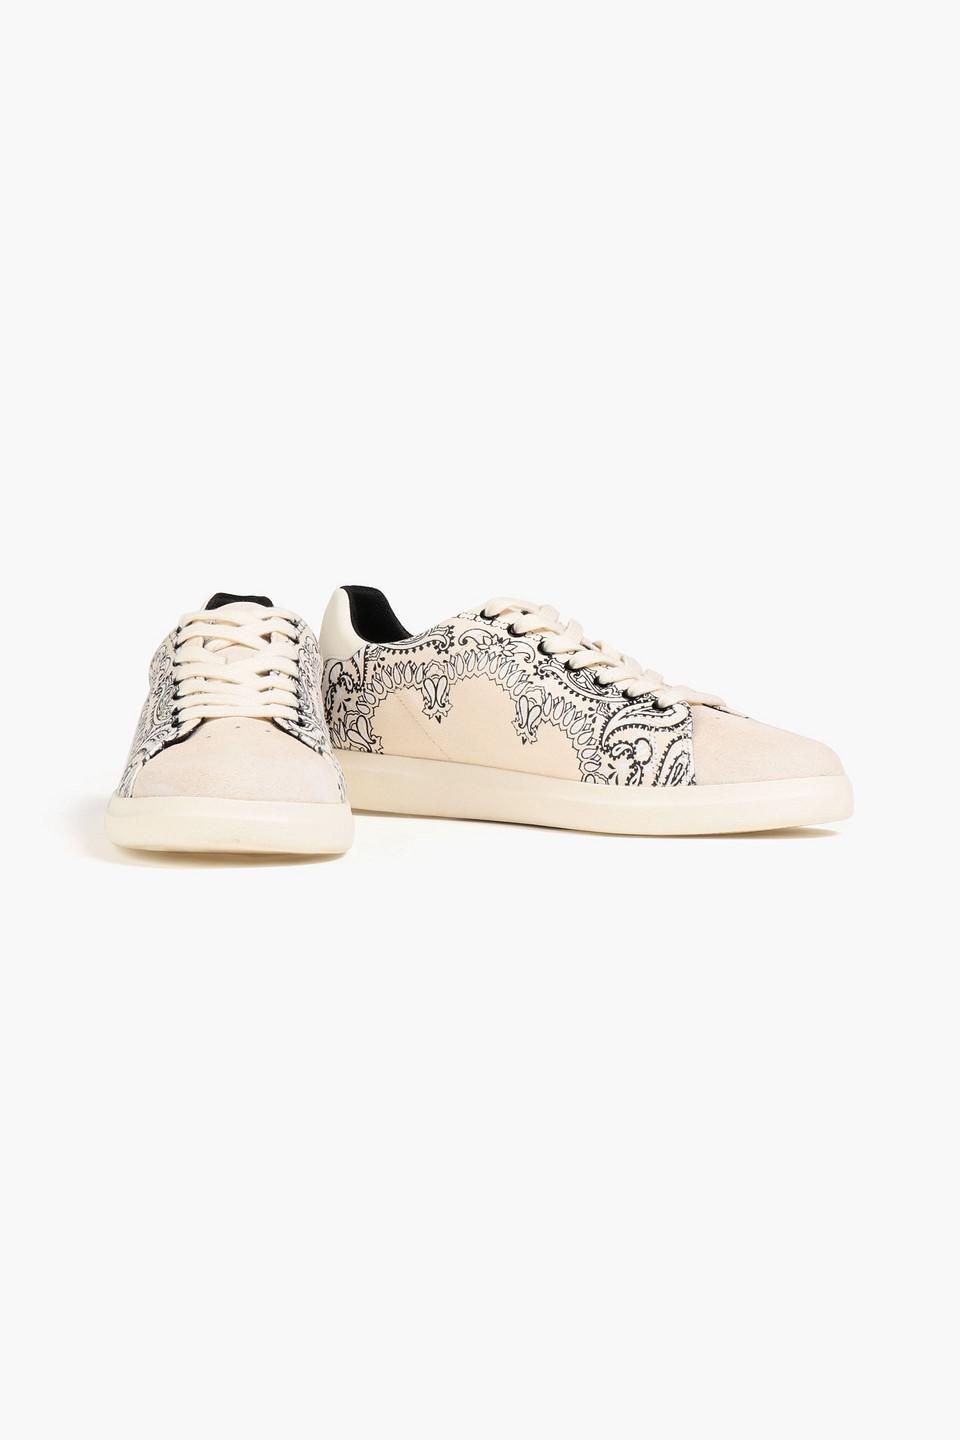 Tory Burch Howell Paisley-print Canvas And Suede Sneakers in White | Lyst UK